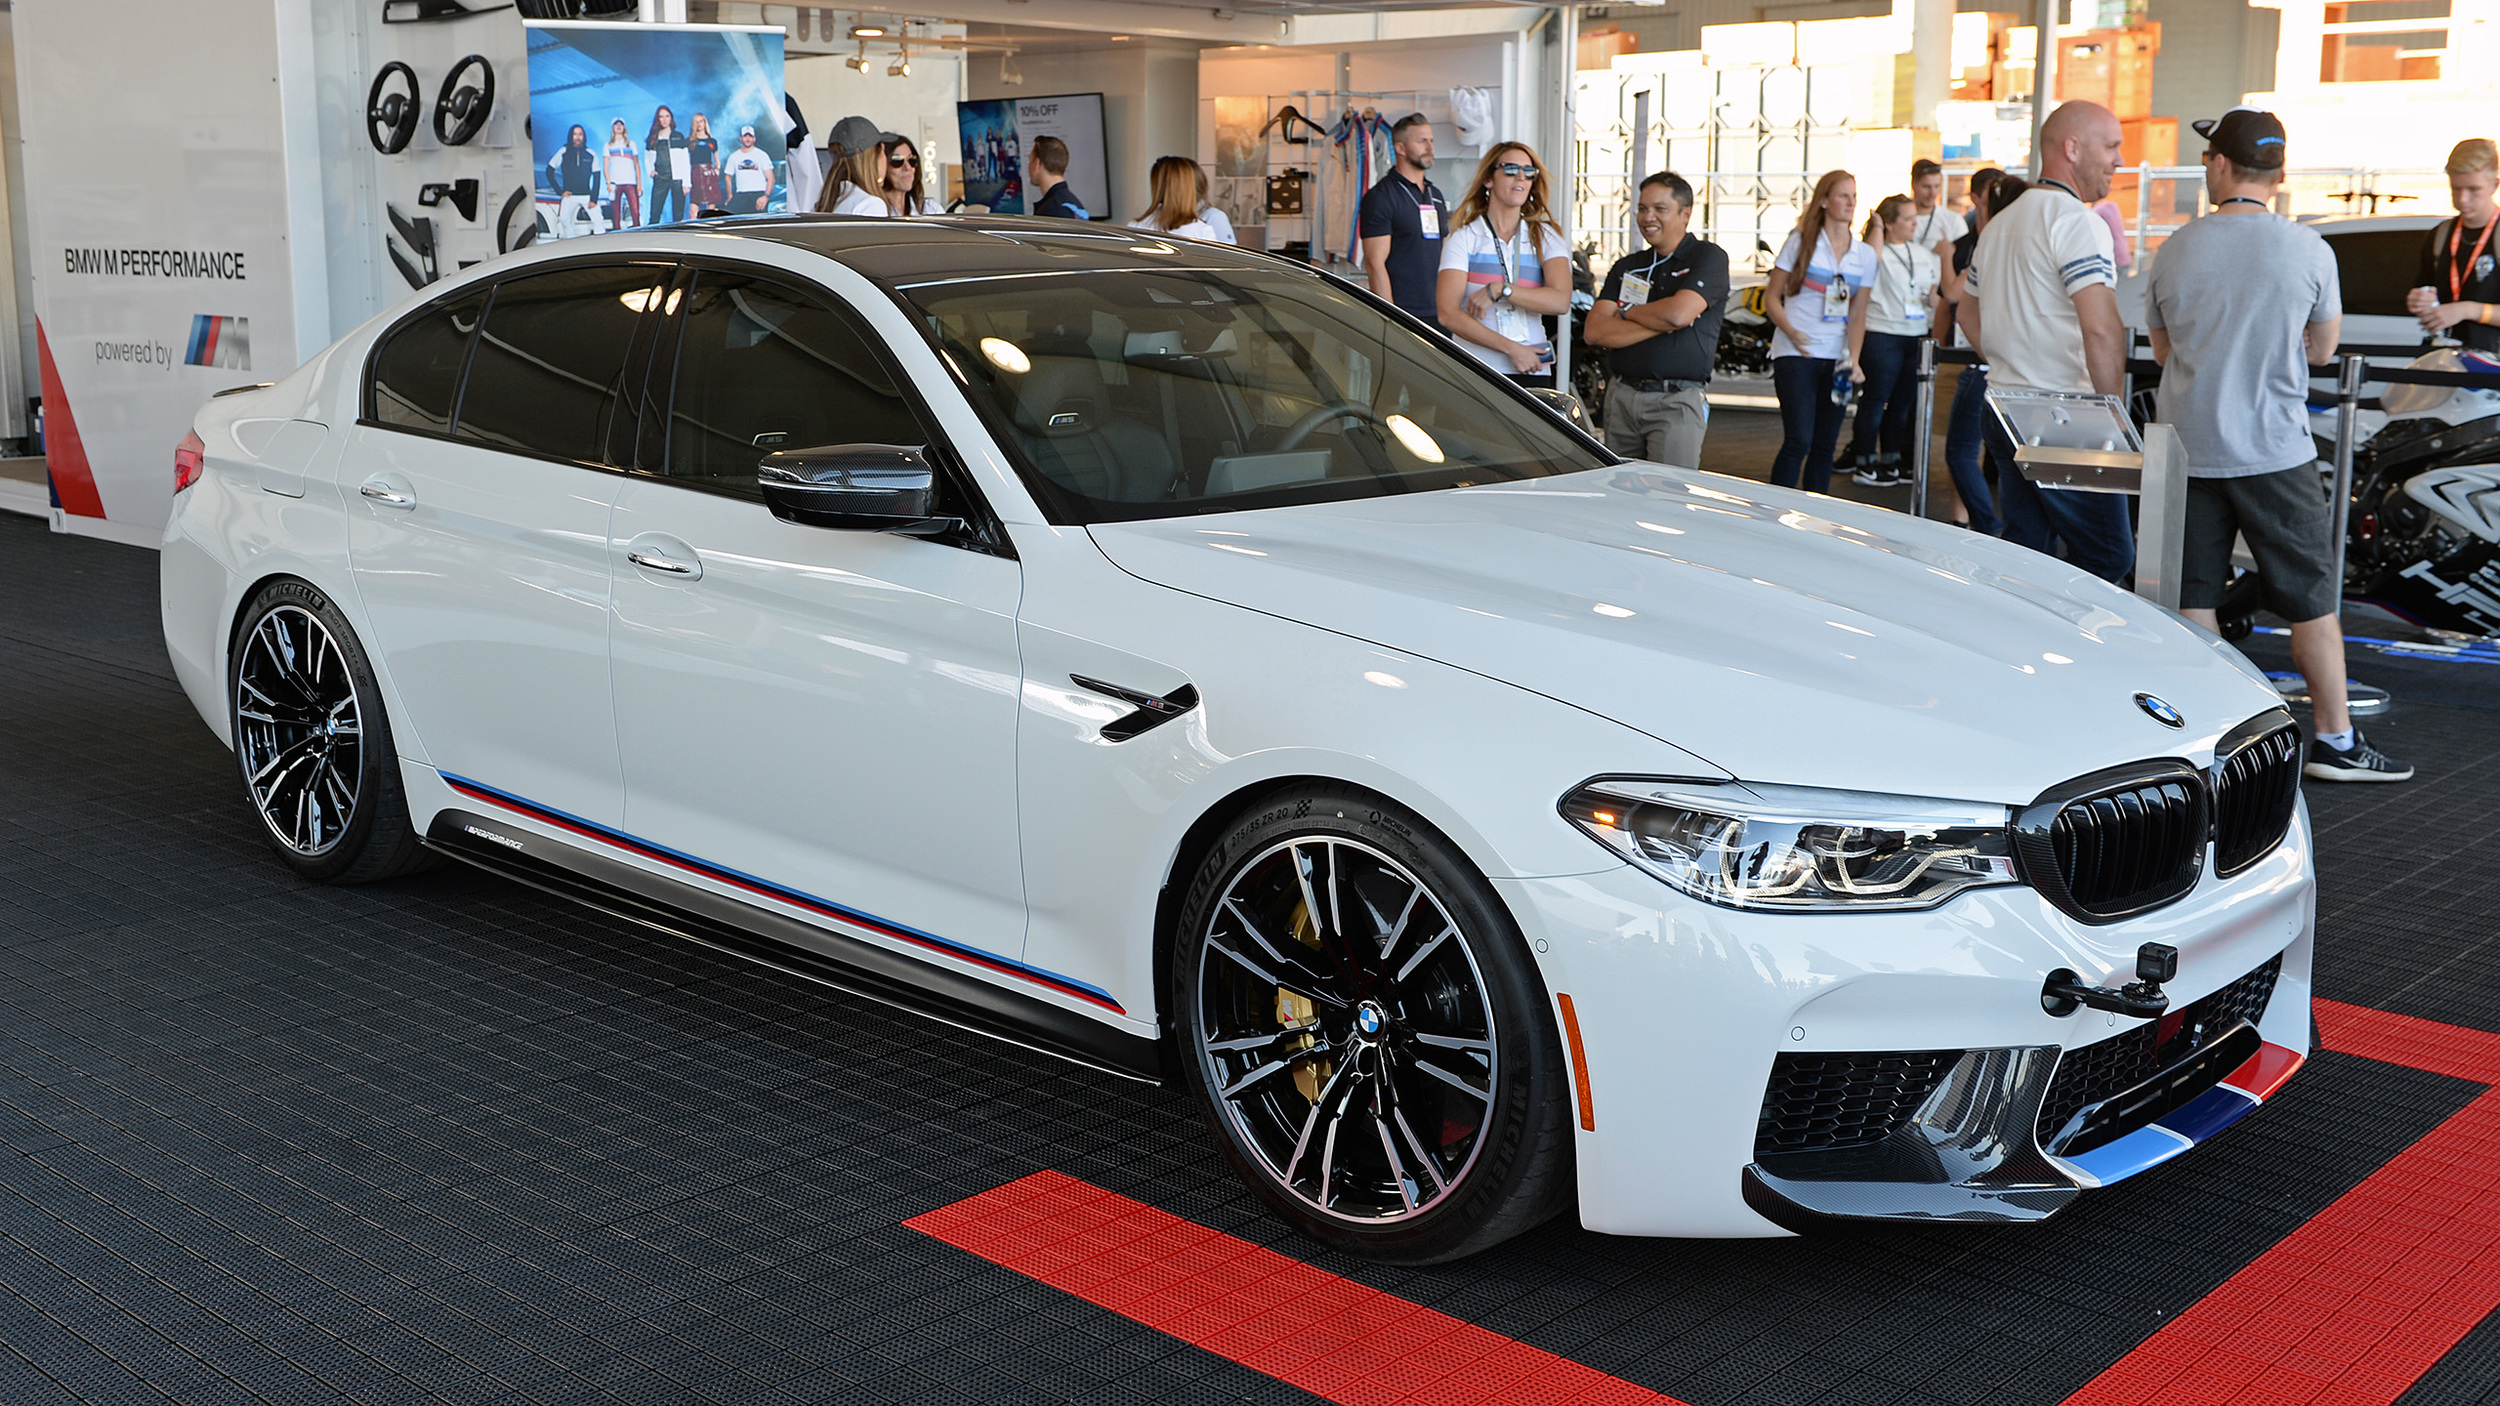 2018 BMW M5 with M Performance Parts: SEMA 2017 Photo Gallery